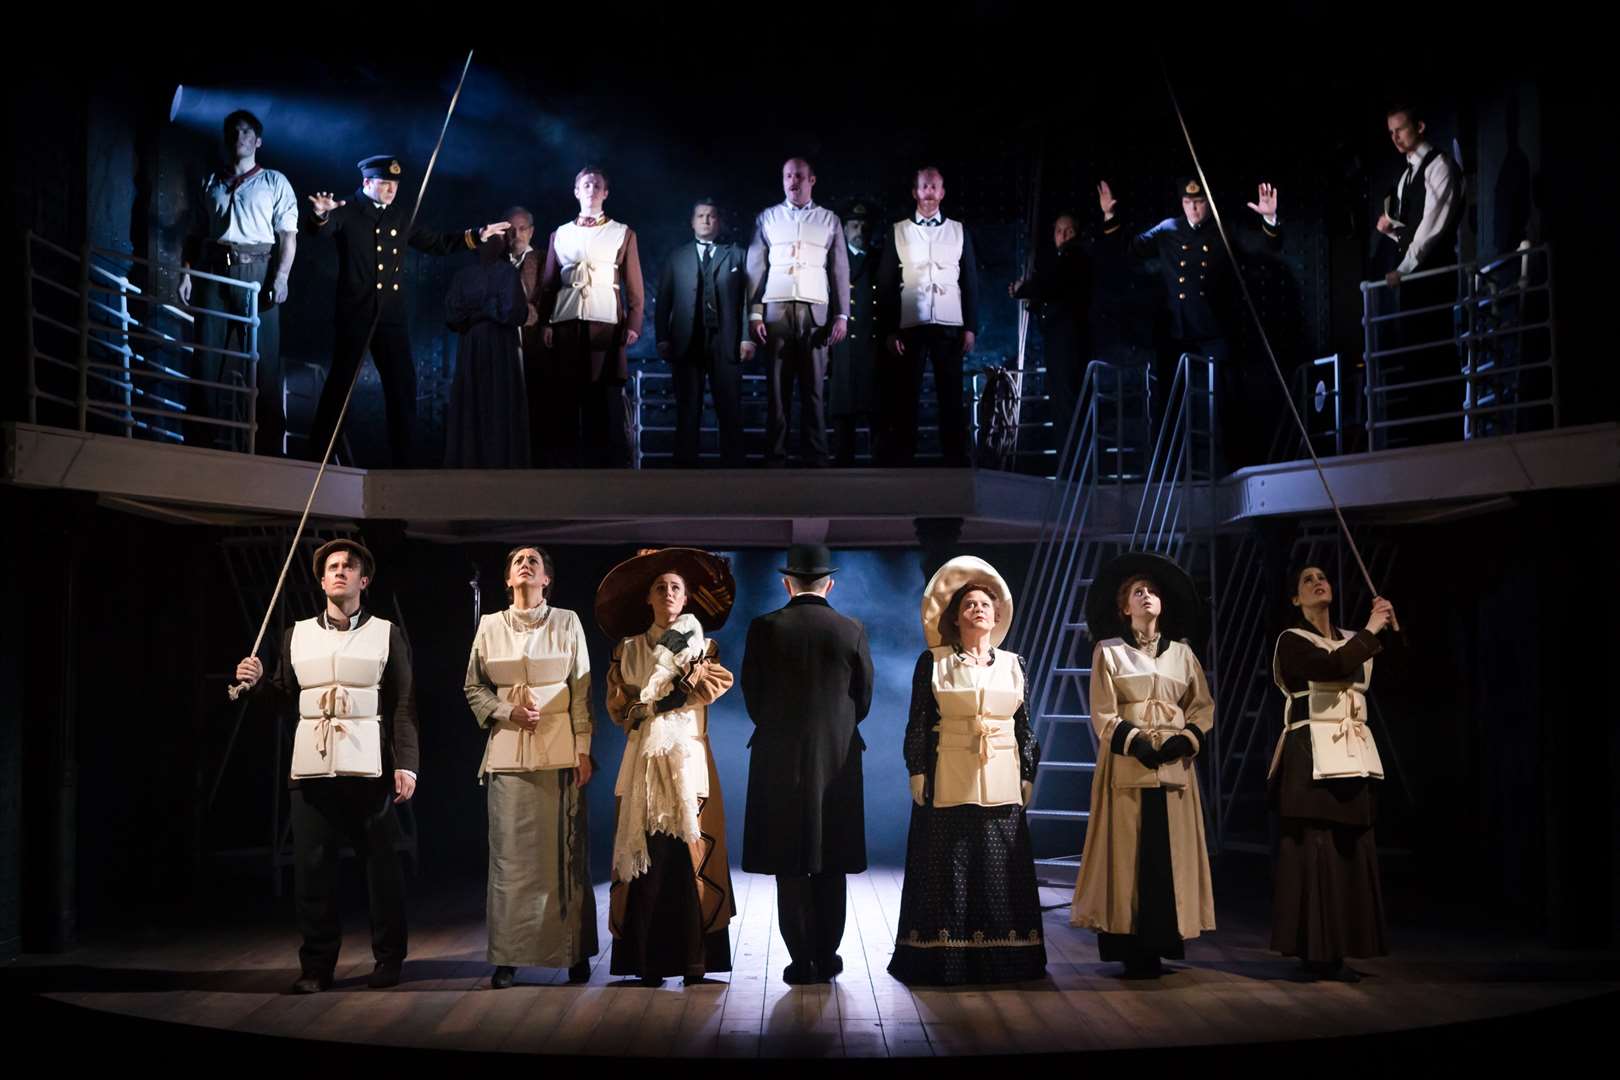 Titanic the Musical is based on the stories of real people